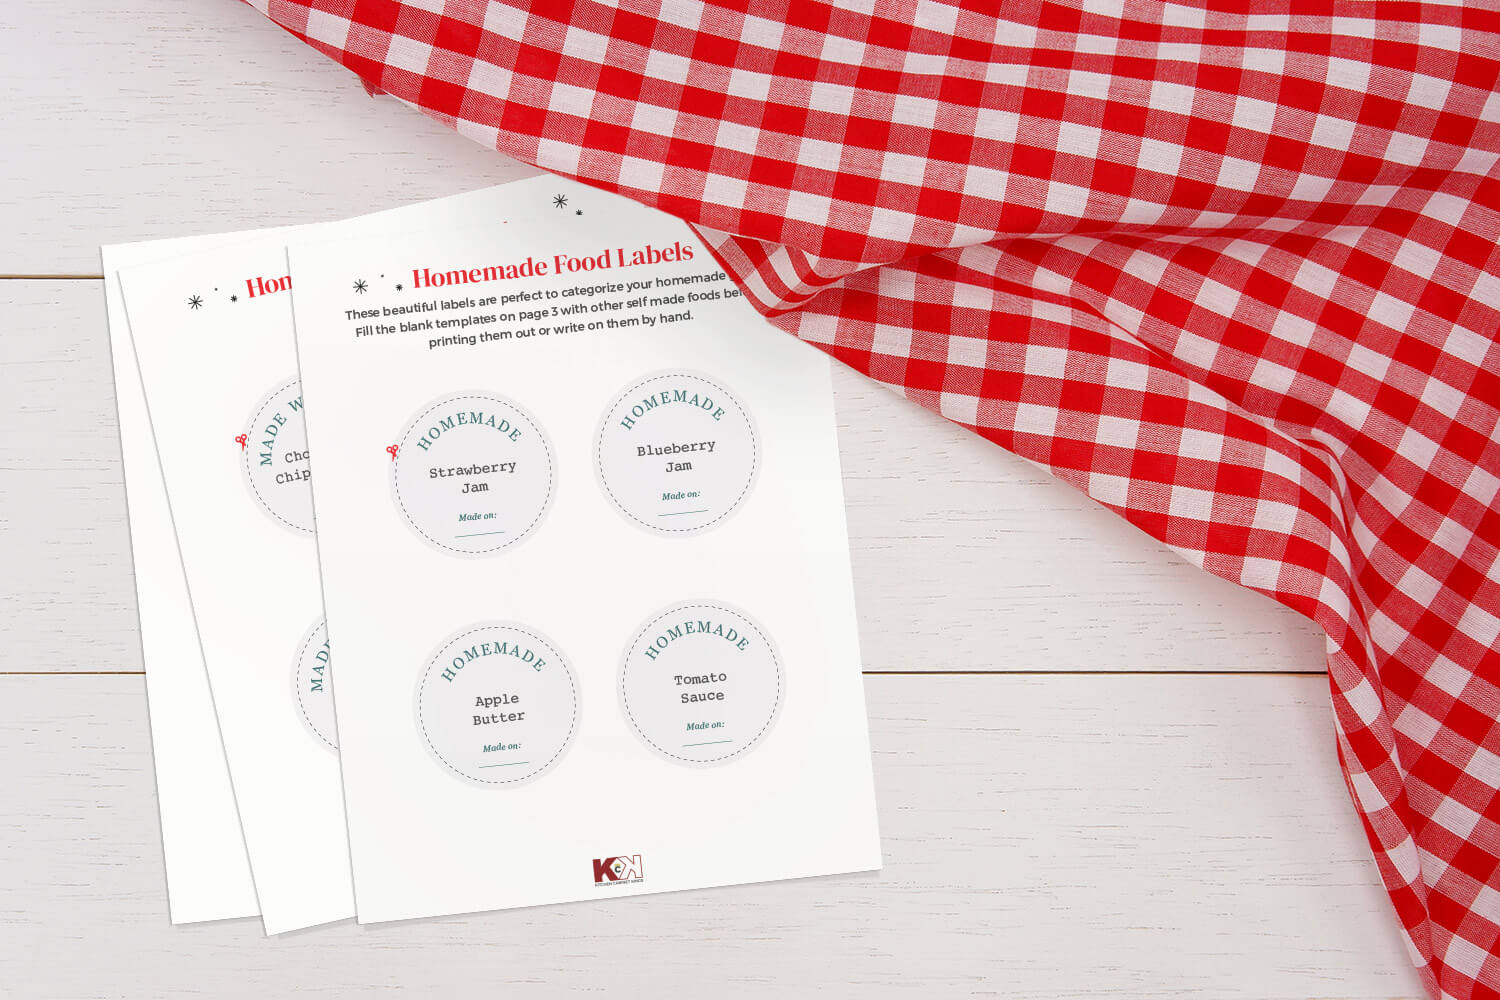 Homemade food label templates on white wooden surface with red and white checkerboard tablecloth.